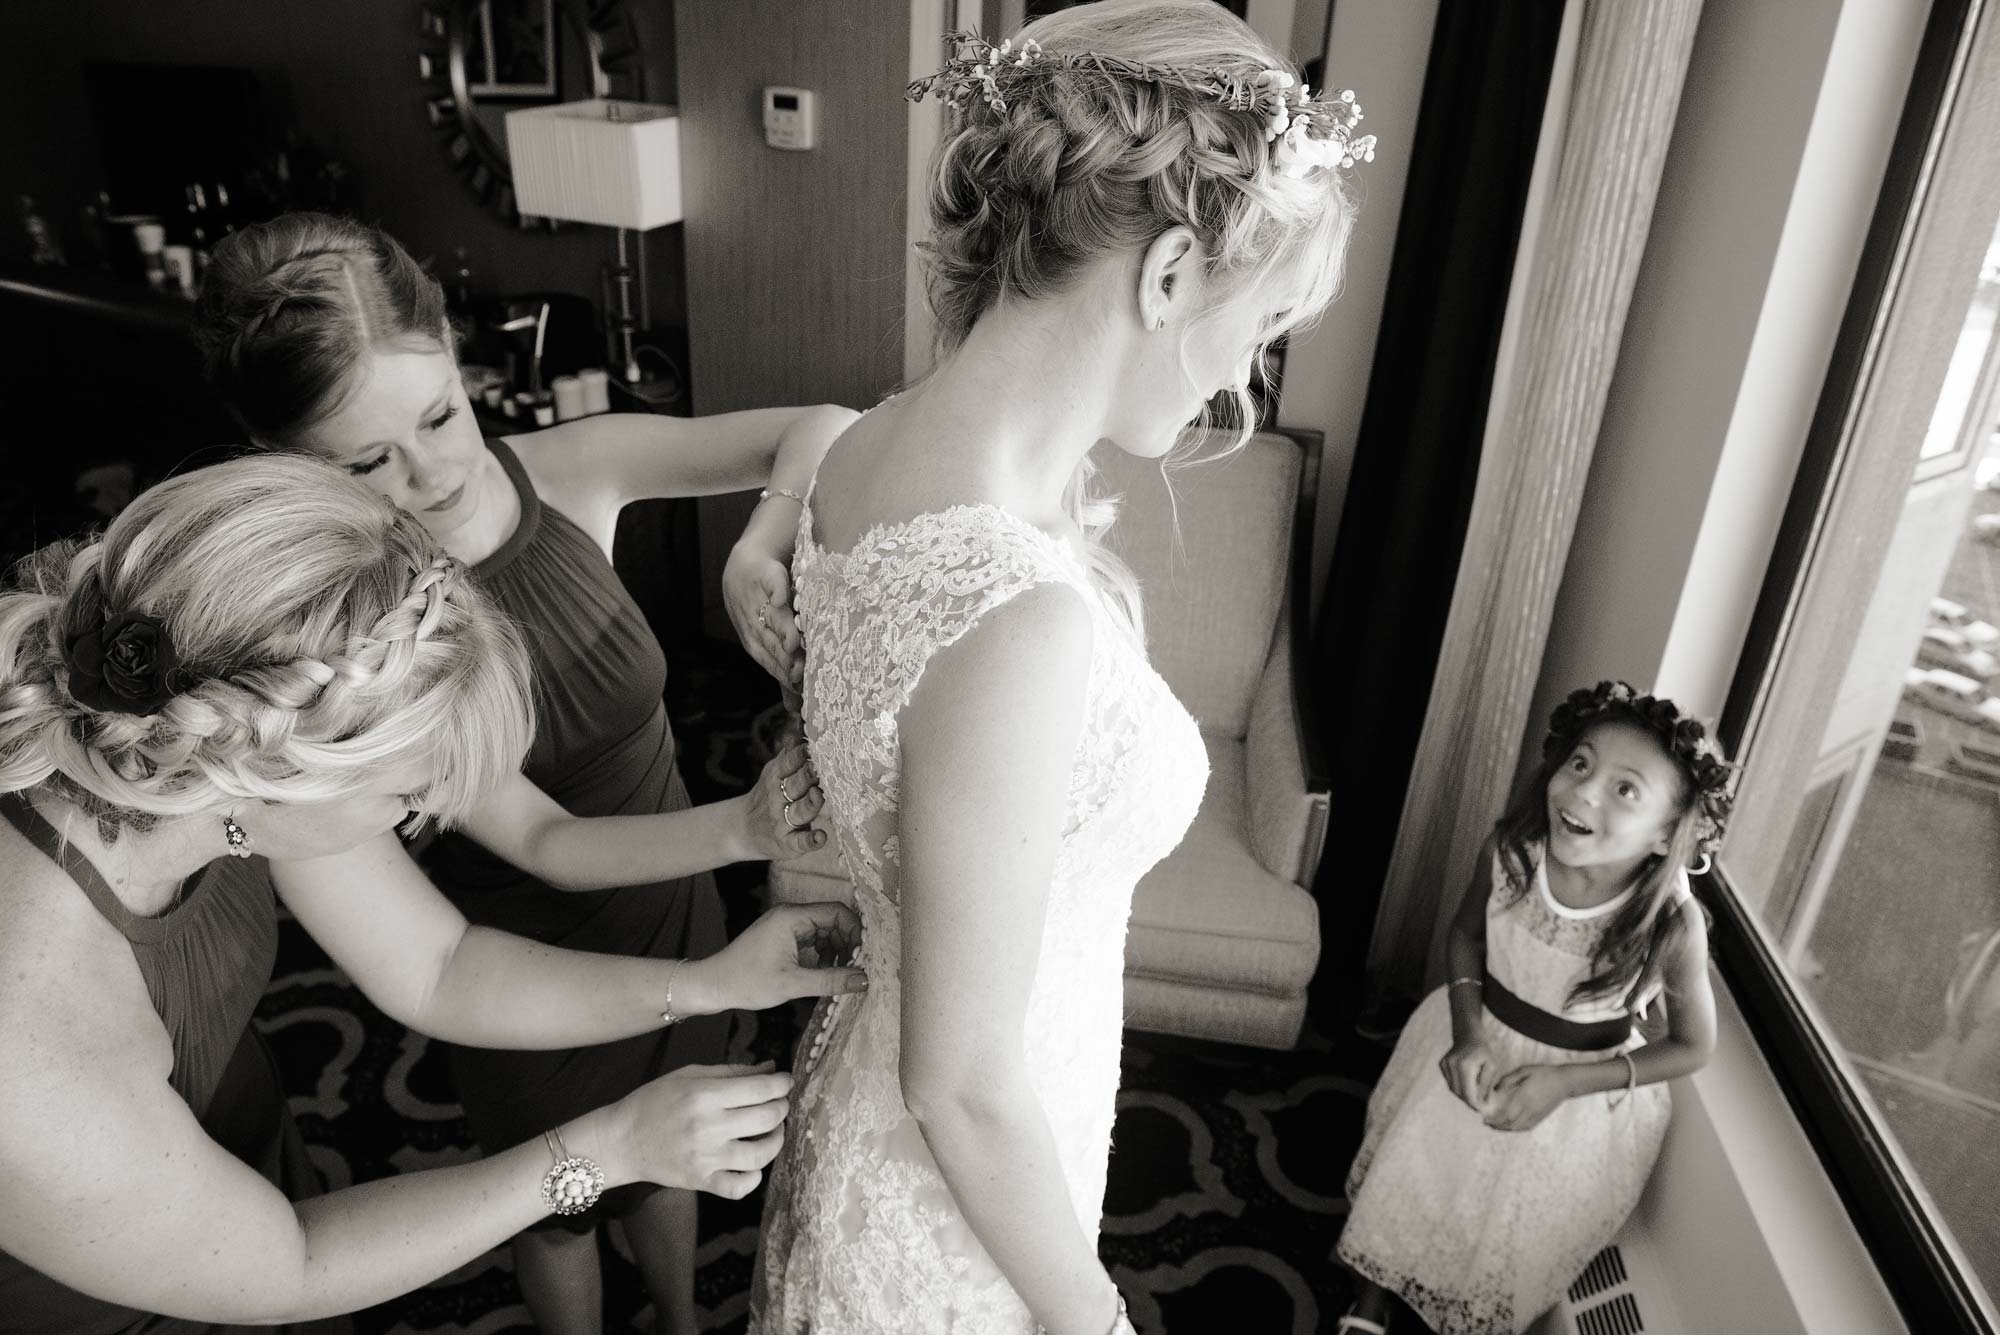 Flower girl with amazing expression looks up at bride getting ready for her wedding at Edgewood Golf and Country Club in South Lake Tahoe, Nevada.